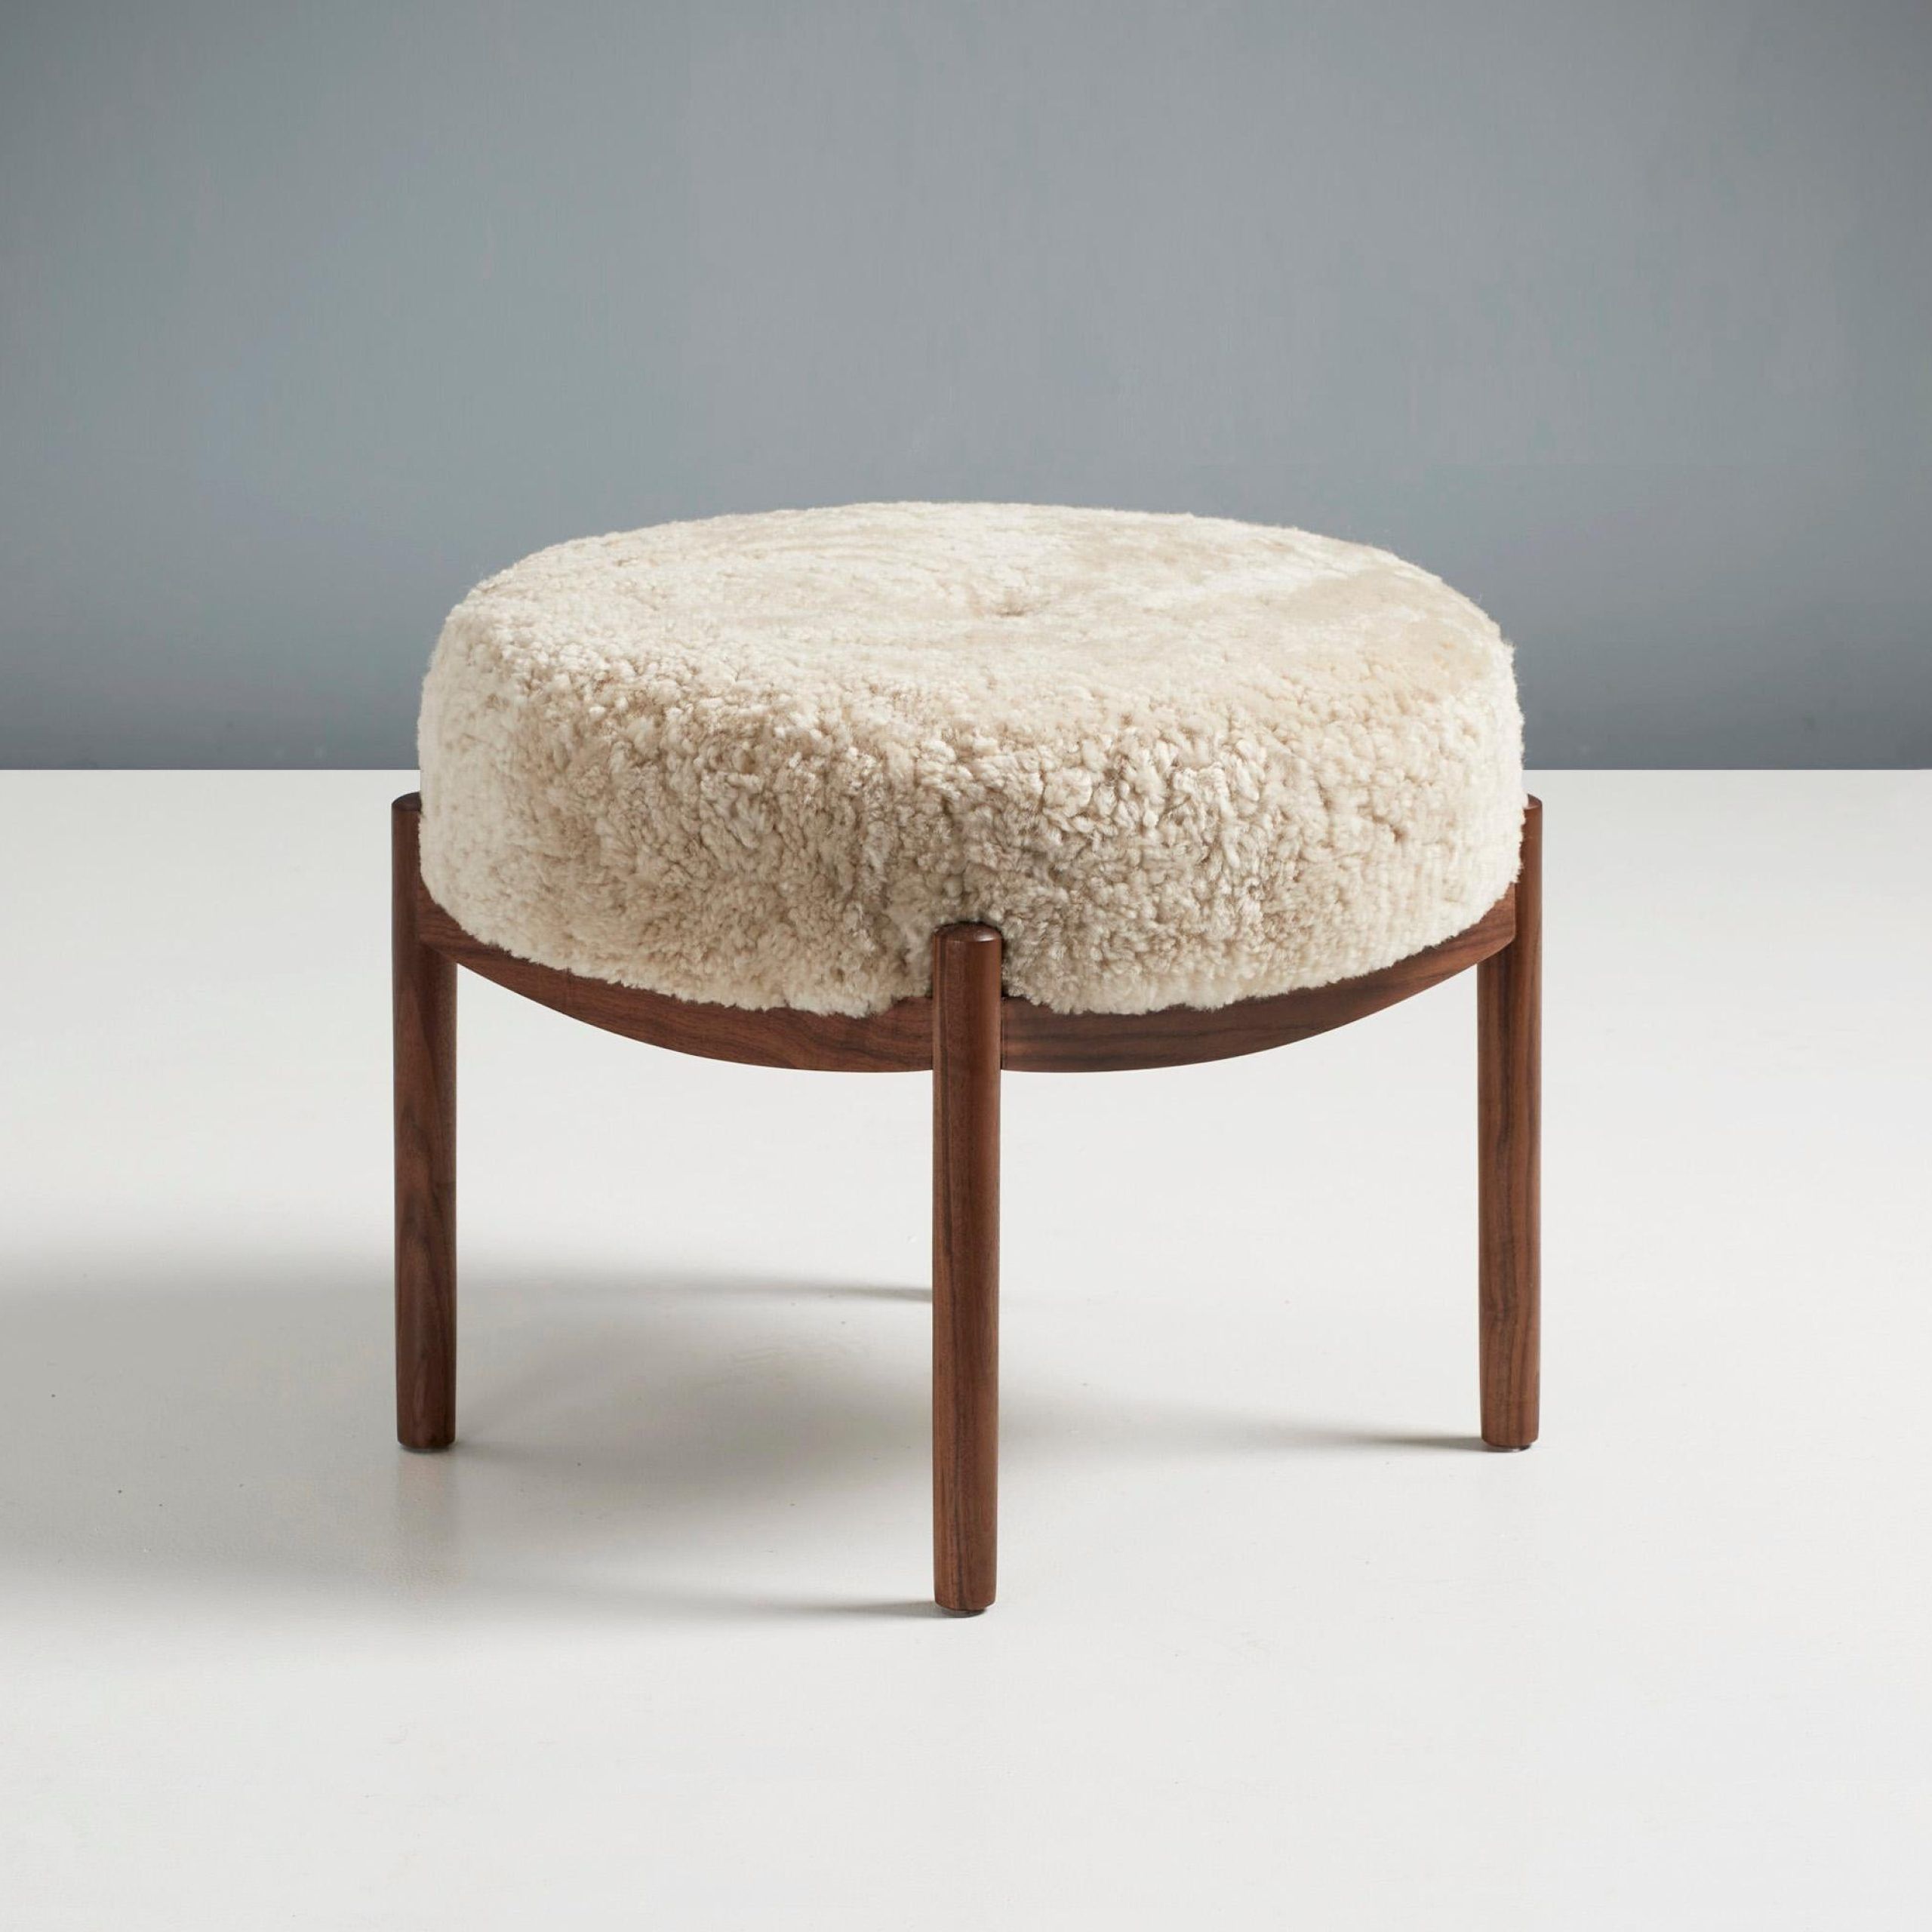 Custom Made Walnut And Shearling Round Ottoman For Sale At 1stdibs Throughout Satin Black Shearling Ottomans (Photo 10 of 15)